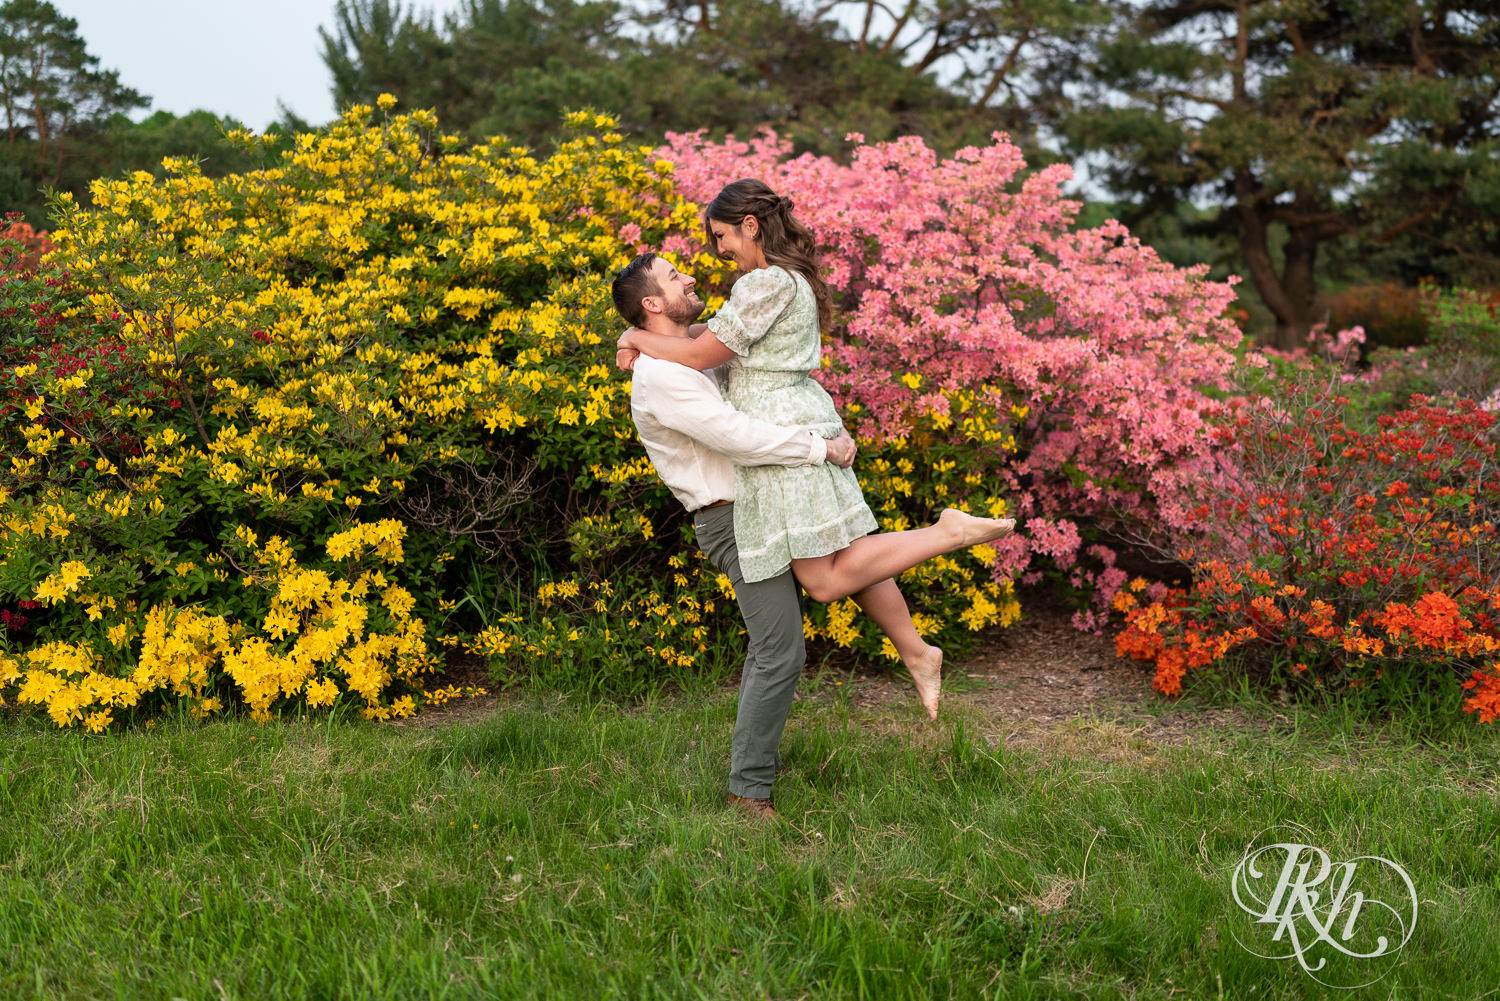 Man in white shirt lifts woman in green dress during engagement photography at the Minnesota Landscape Arboretum in Chaska, Minnesota.